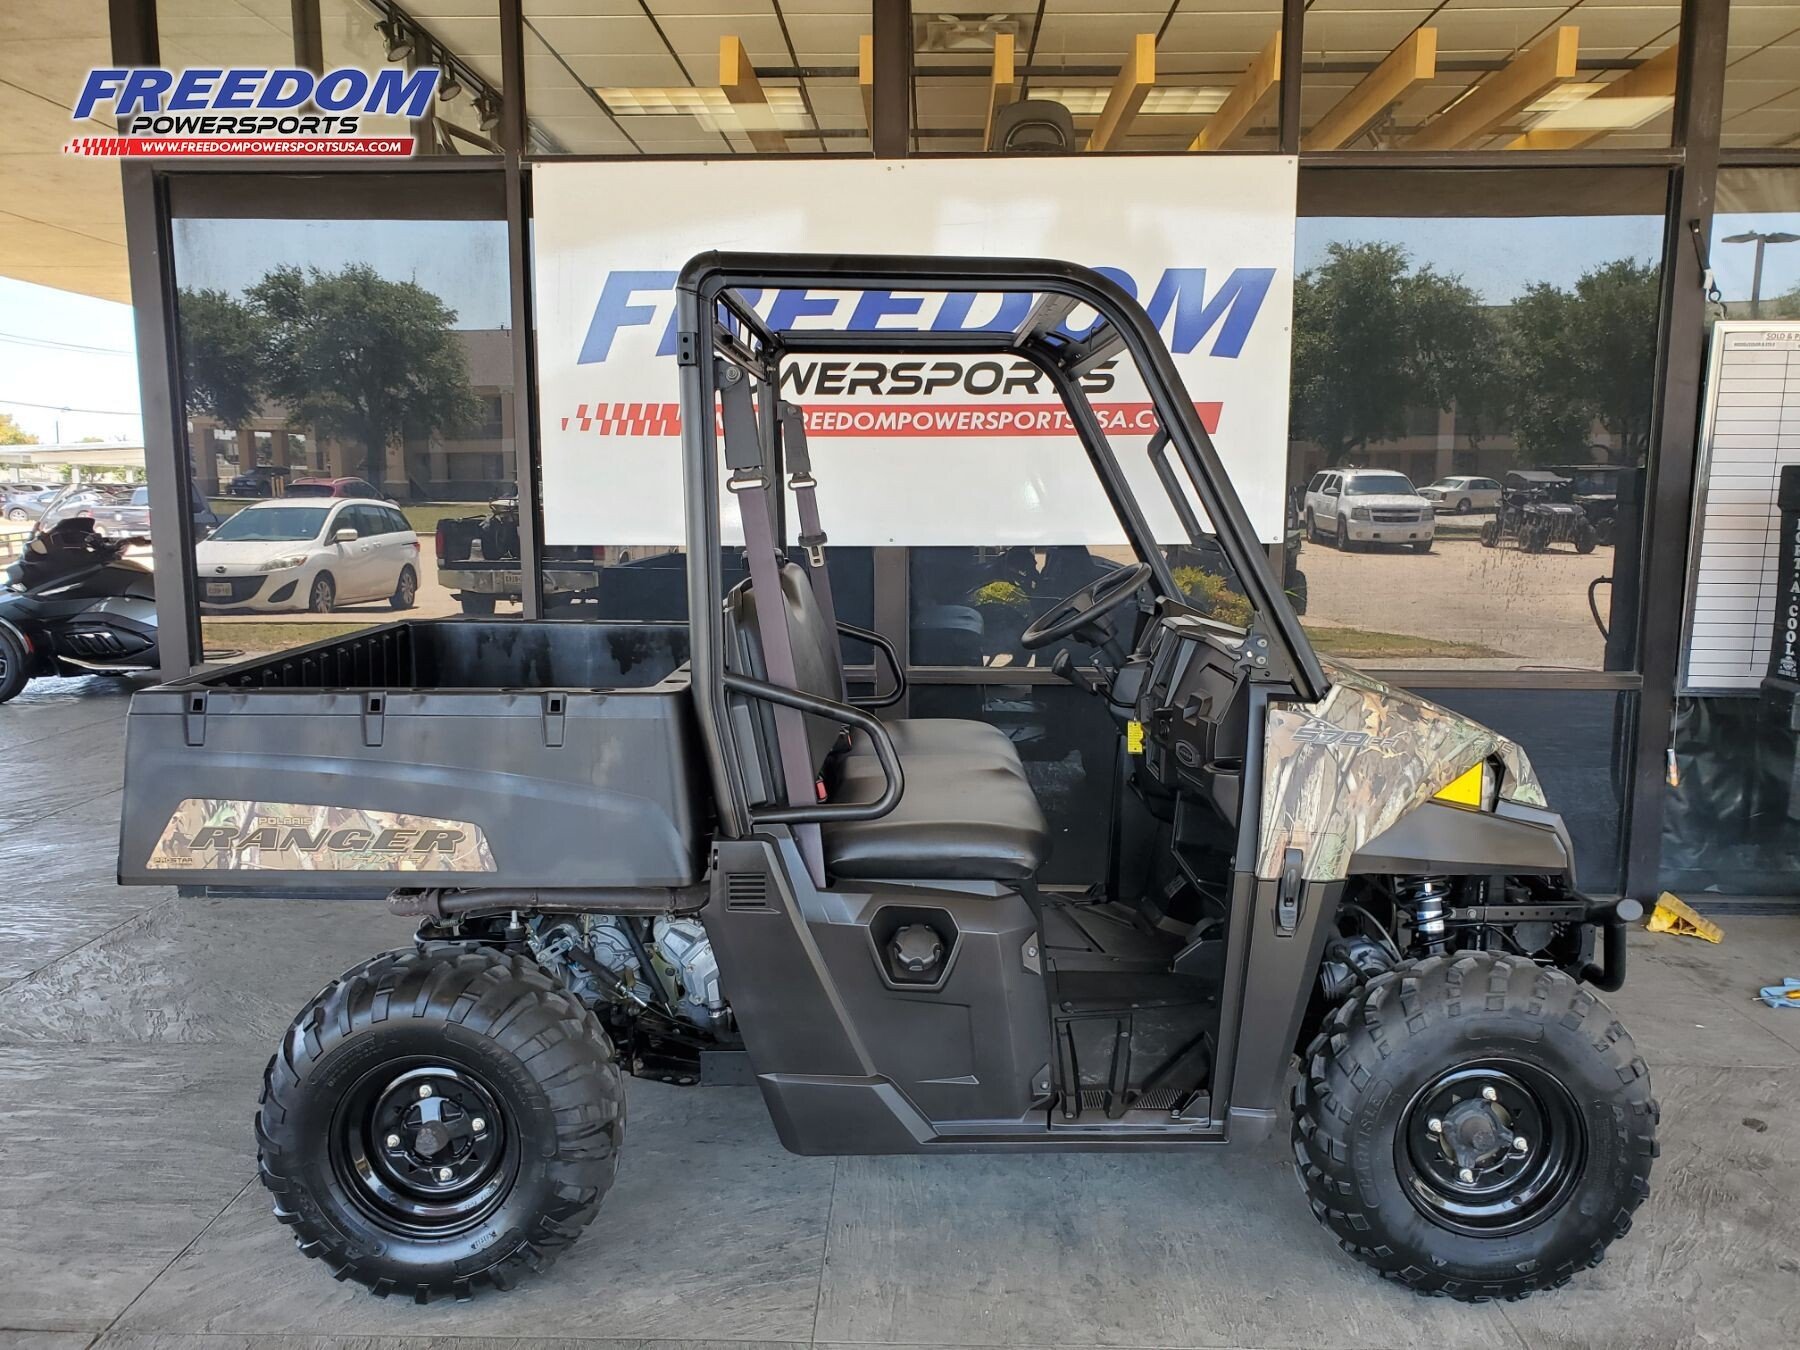 2016 Polaris Ranger 500 Motorcycles for Sale - Motorcycles on Autotrader